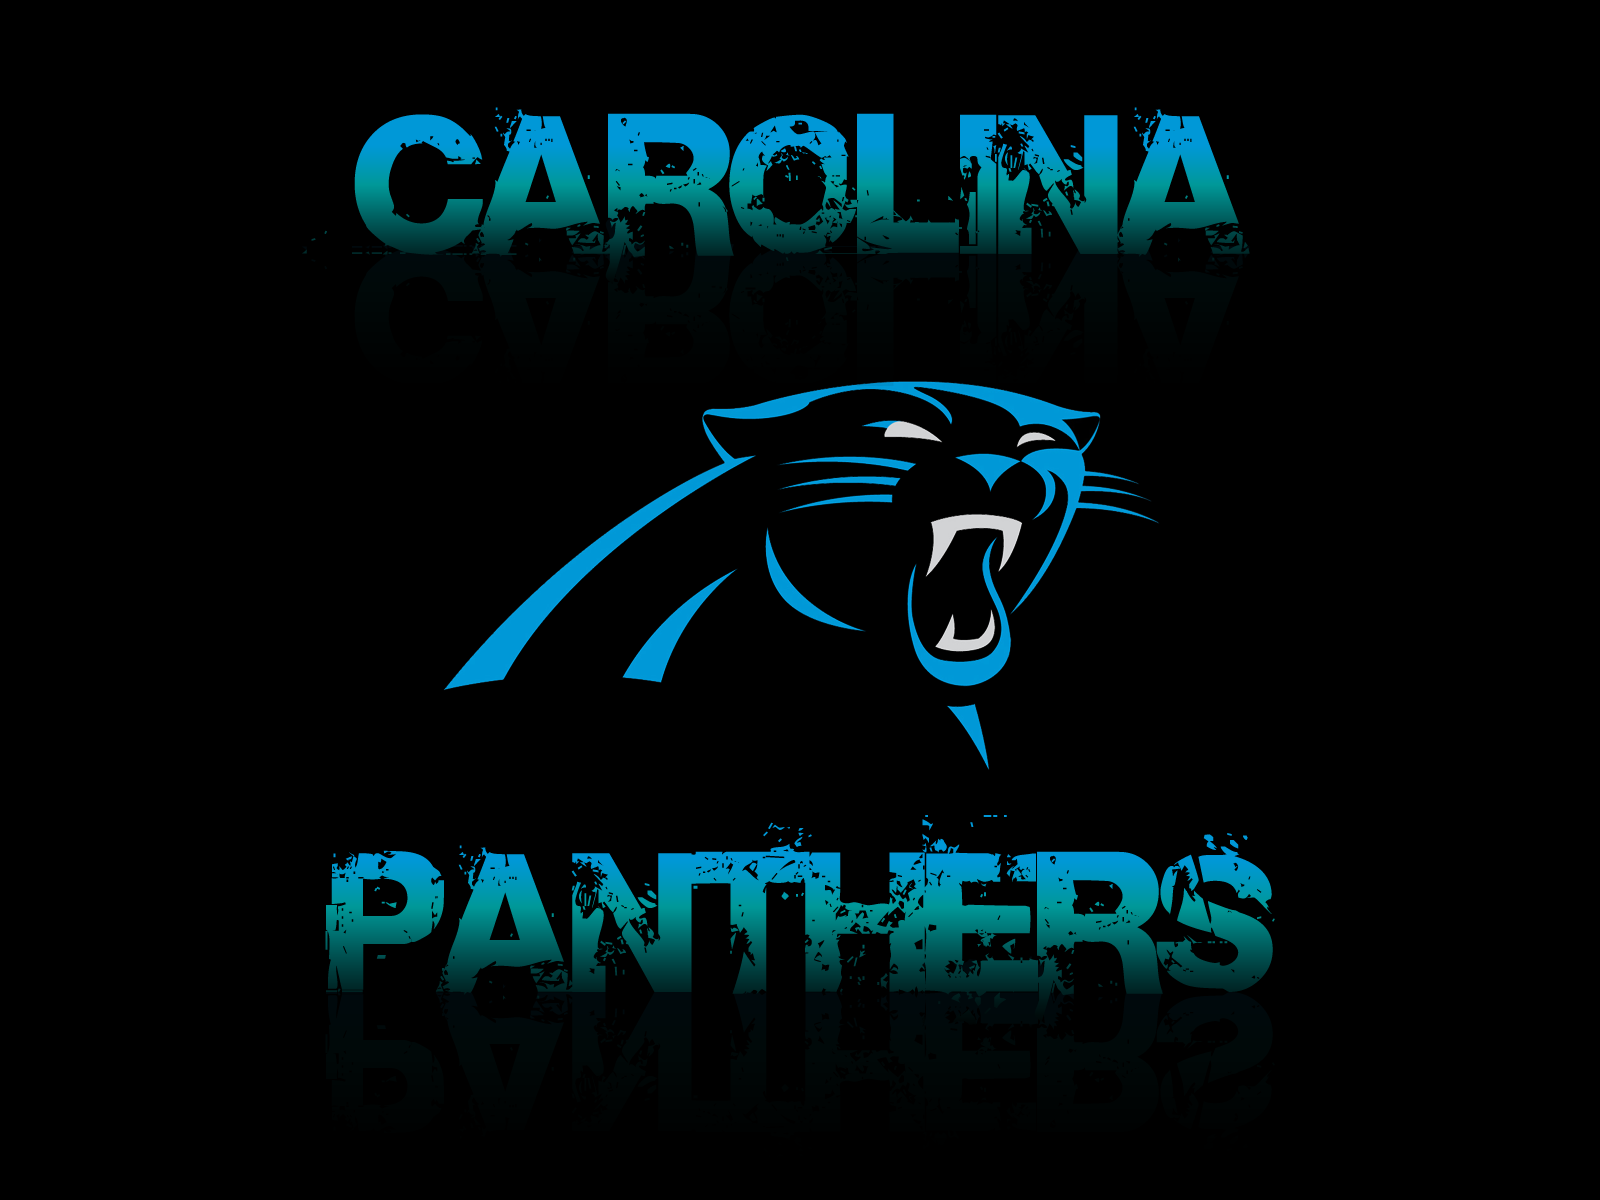 Carolina Panthers Dark Wallpaper for Phones and Tablets 1600x1200